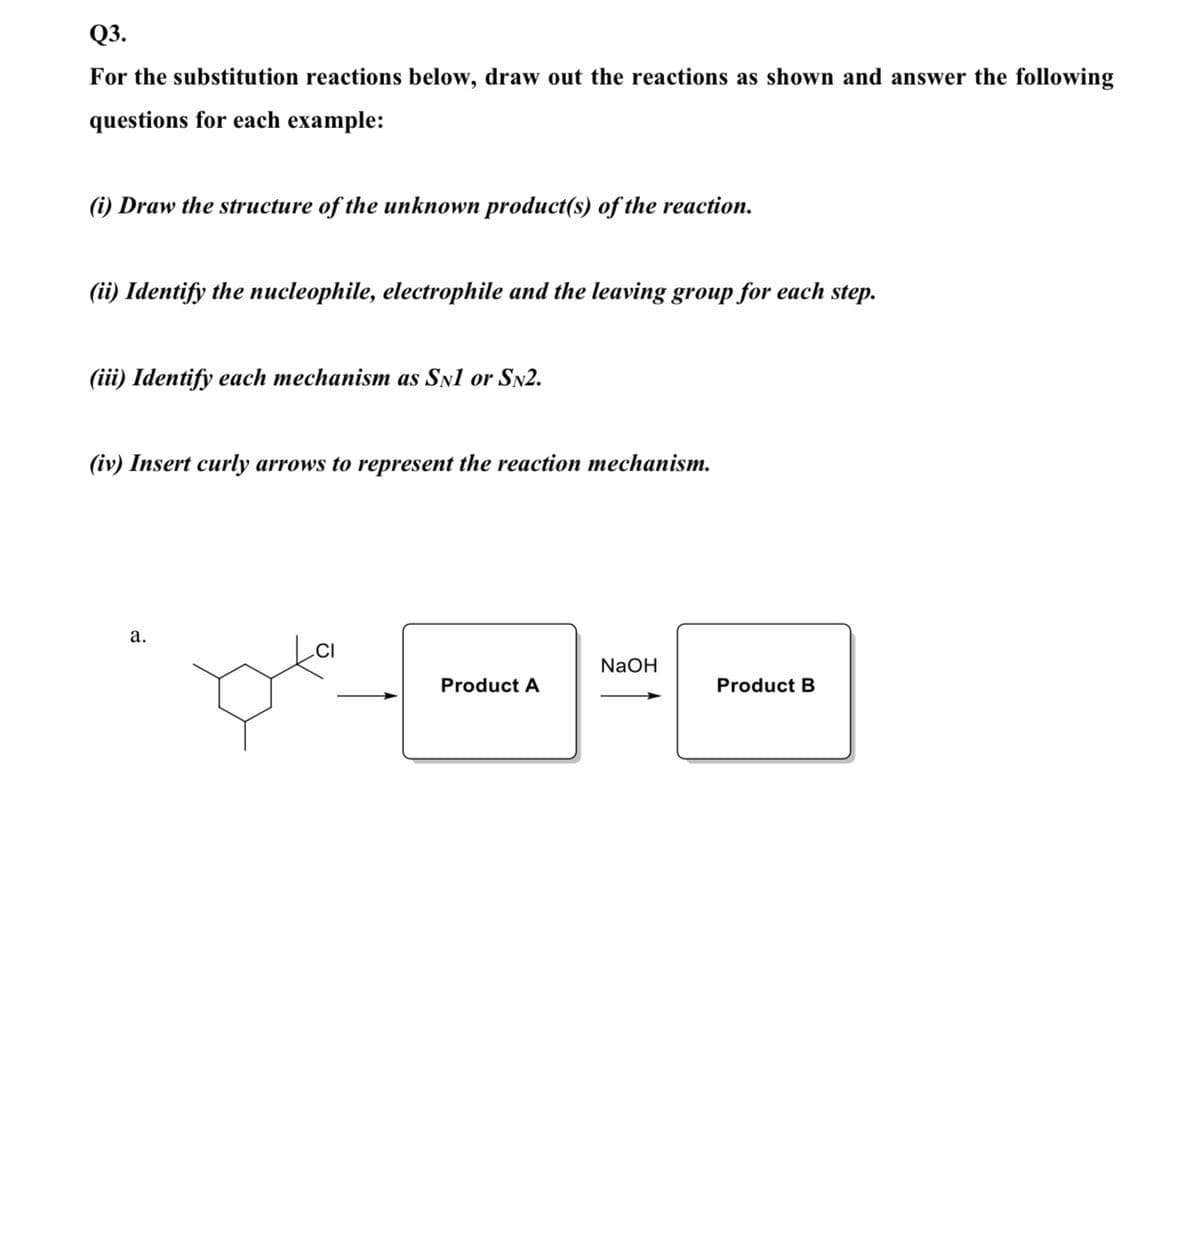 Q3.
For the substitution reactions below, draw out the reactions as shown and answer the following
questions for each example:
(i) Draw the structure of the unknown product(s) of the reaction.
(ii) Identify the nucleophile, electrophile and the leaving group for each step.
(iii) Identify each mechanism as Snl or SN2.
(iv) Insert curly arrows to represent the reaction mechanism.
а.
NaOH
Product A
Product B
